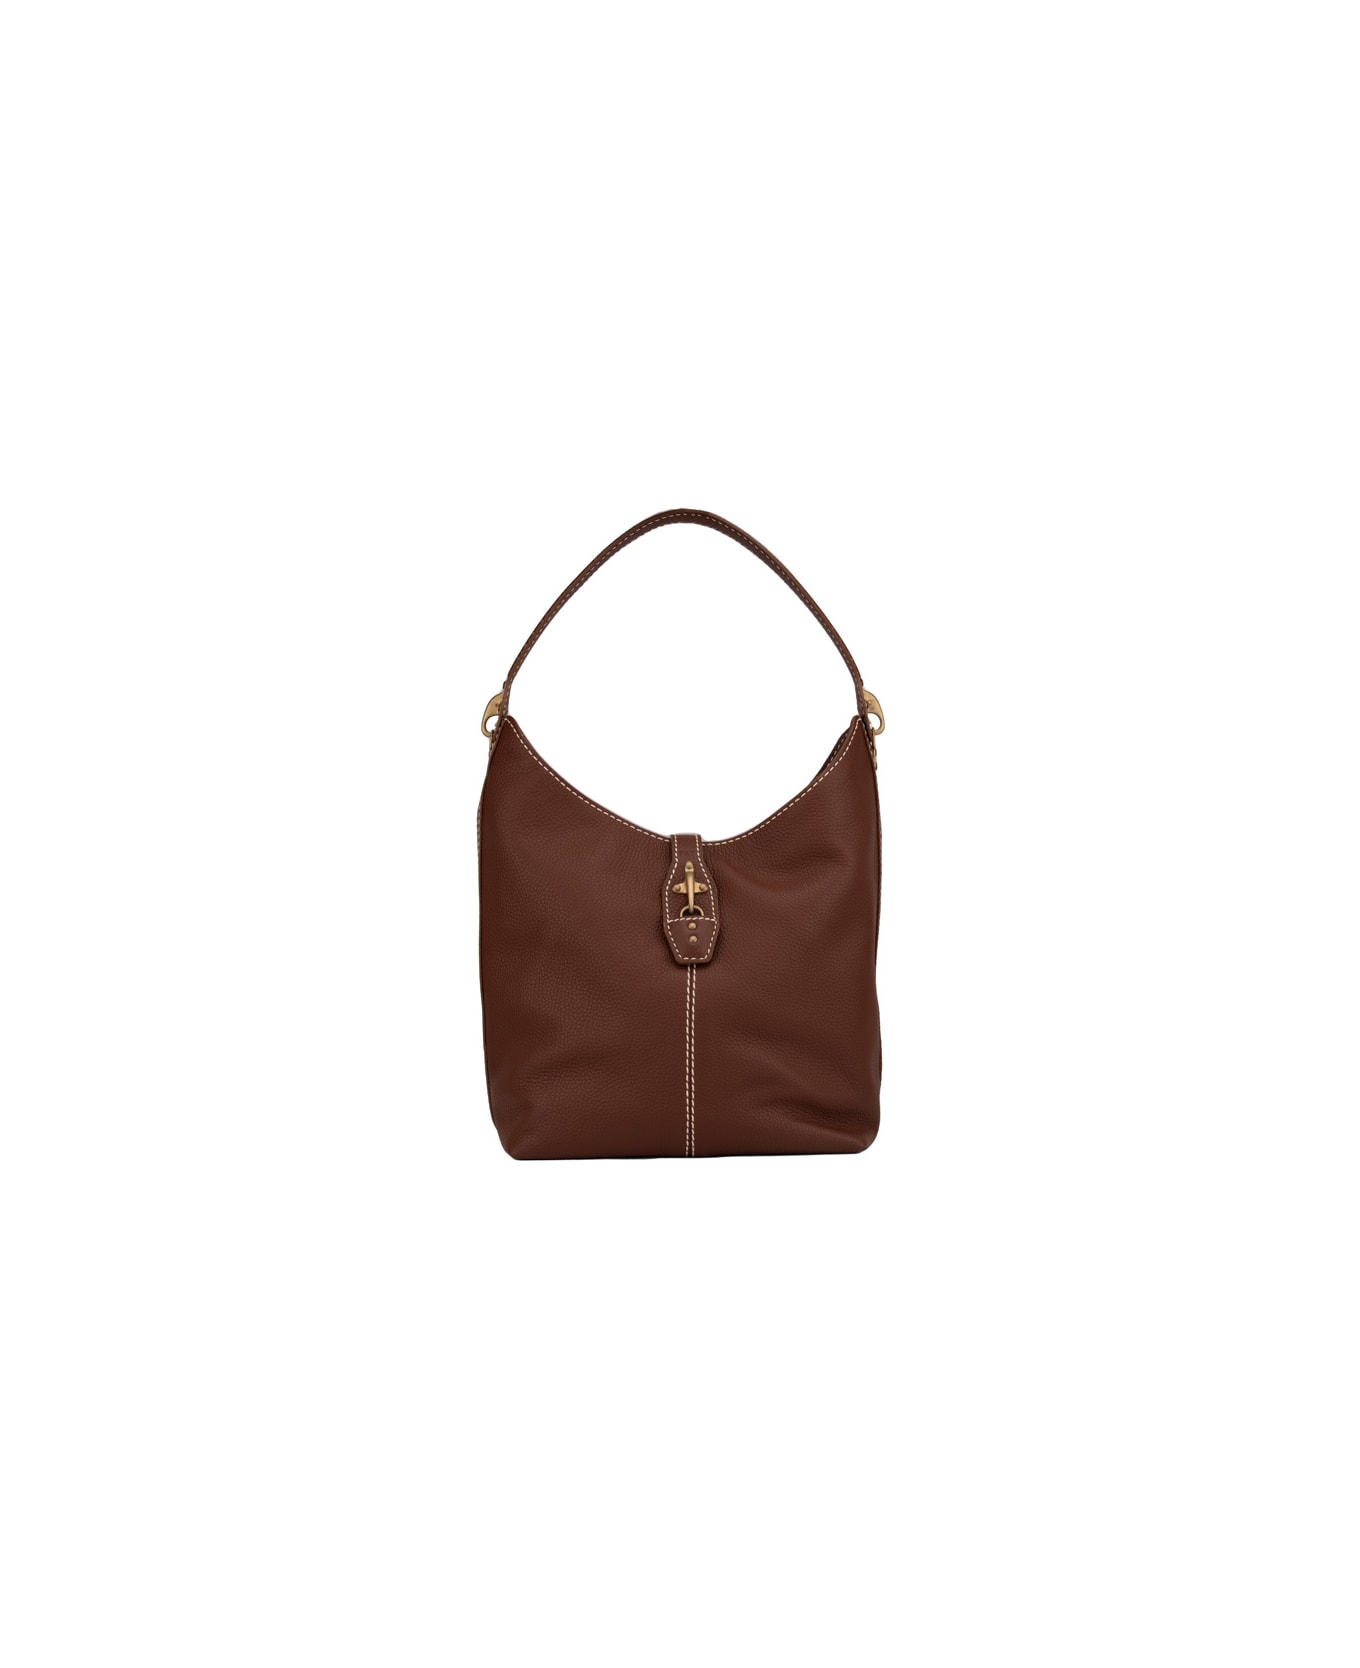 Fay Hobo Bag In Leather - Marrone scuro